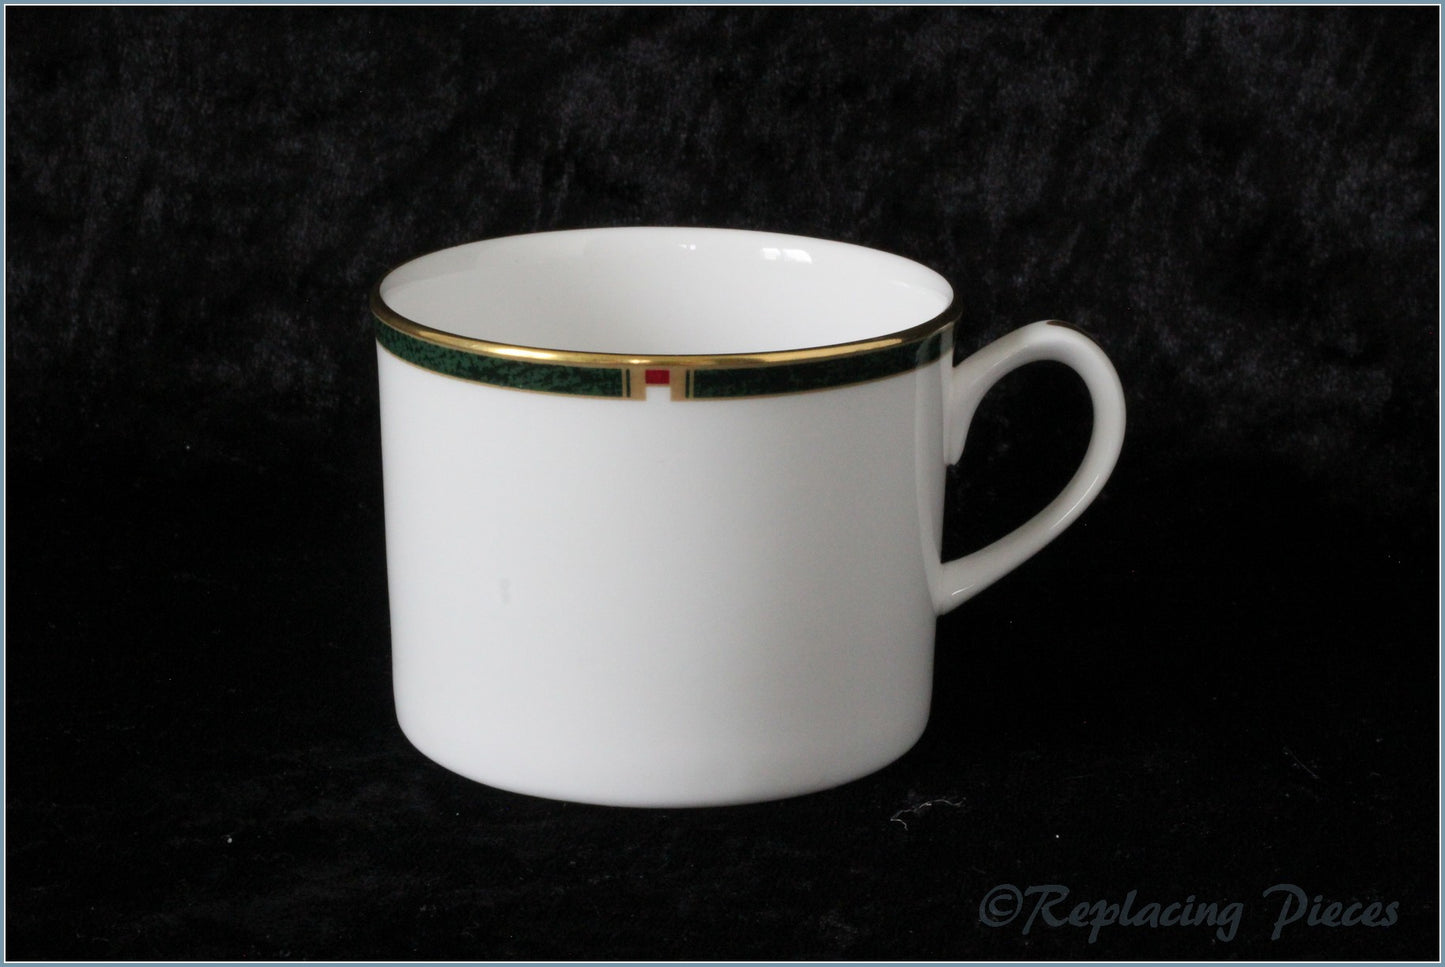 Royal Worcester - Carina (Green) - Teacup (Straight Sided)